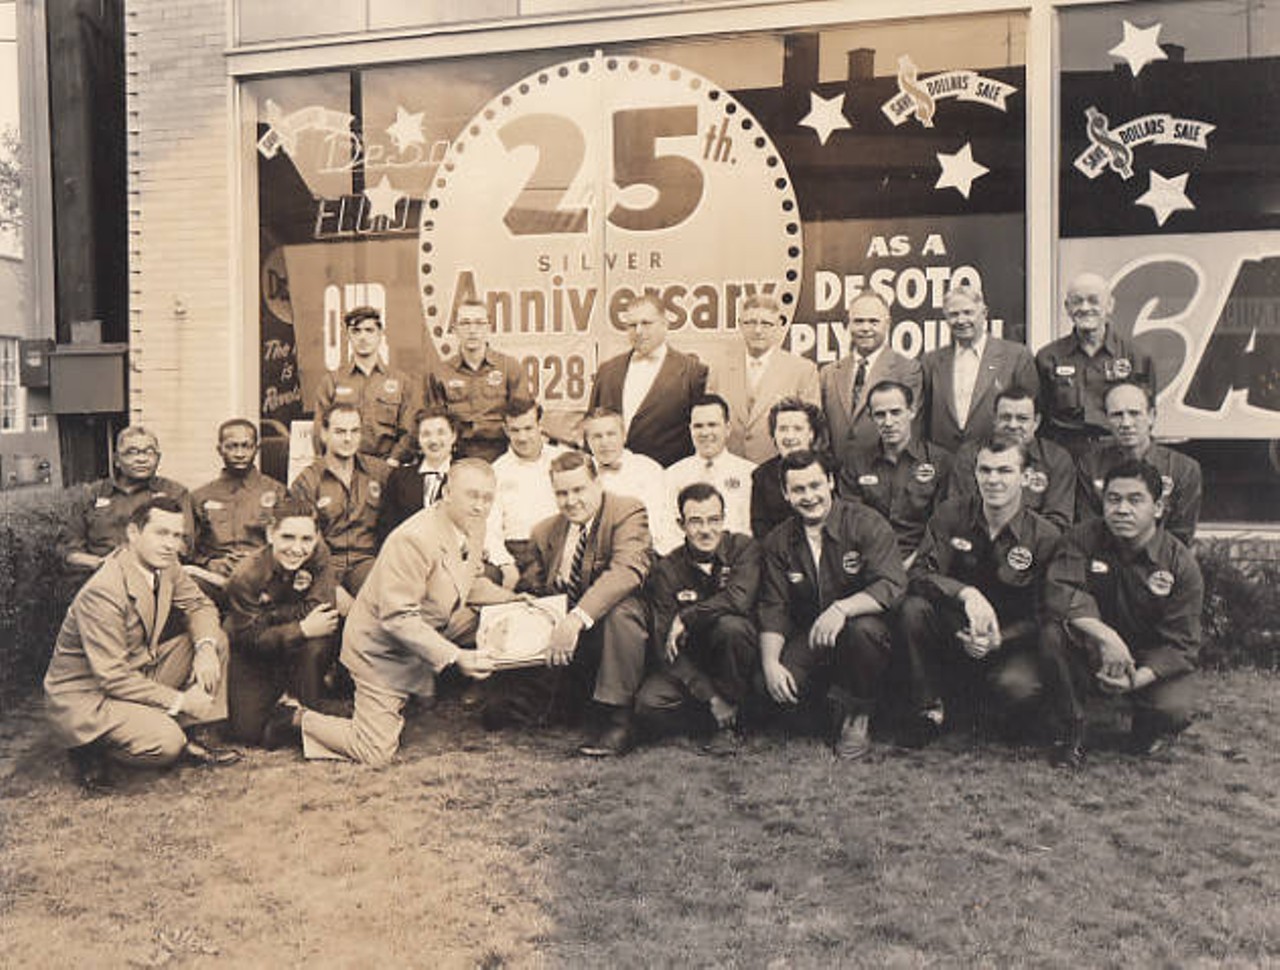  25th Anniversary of Plymouth and Desoto Automobile Dealership, 1953 